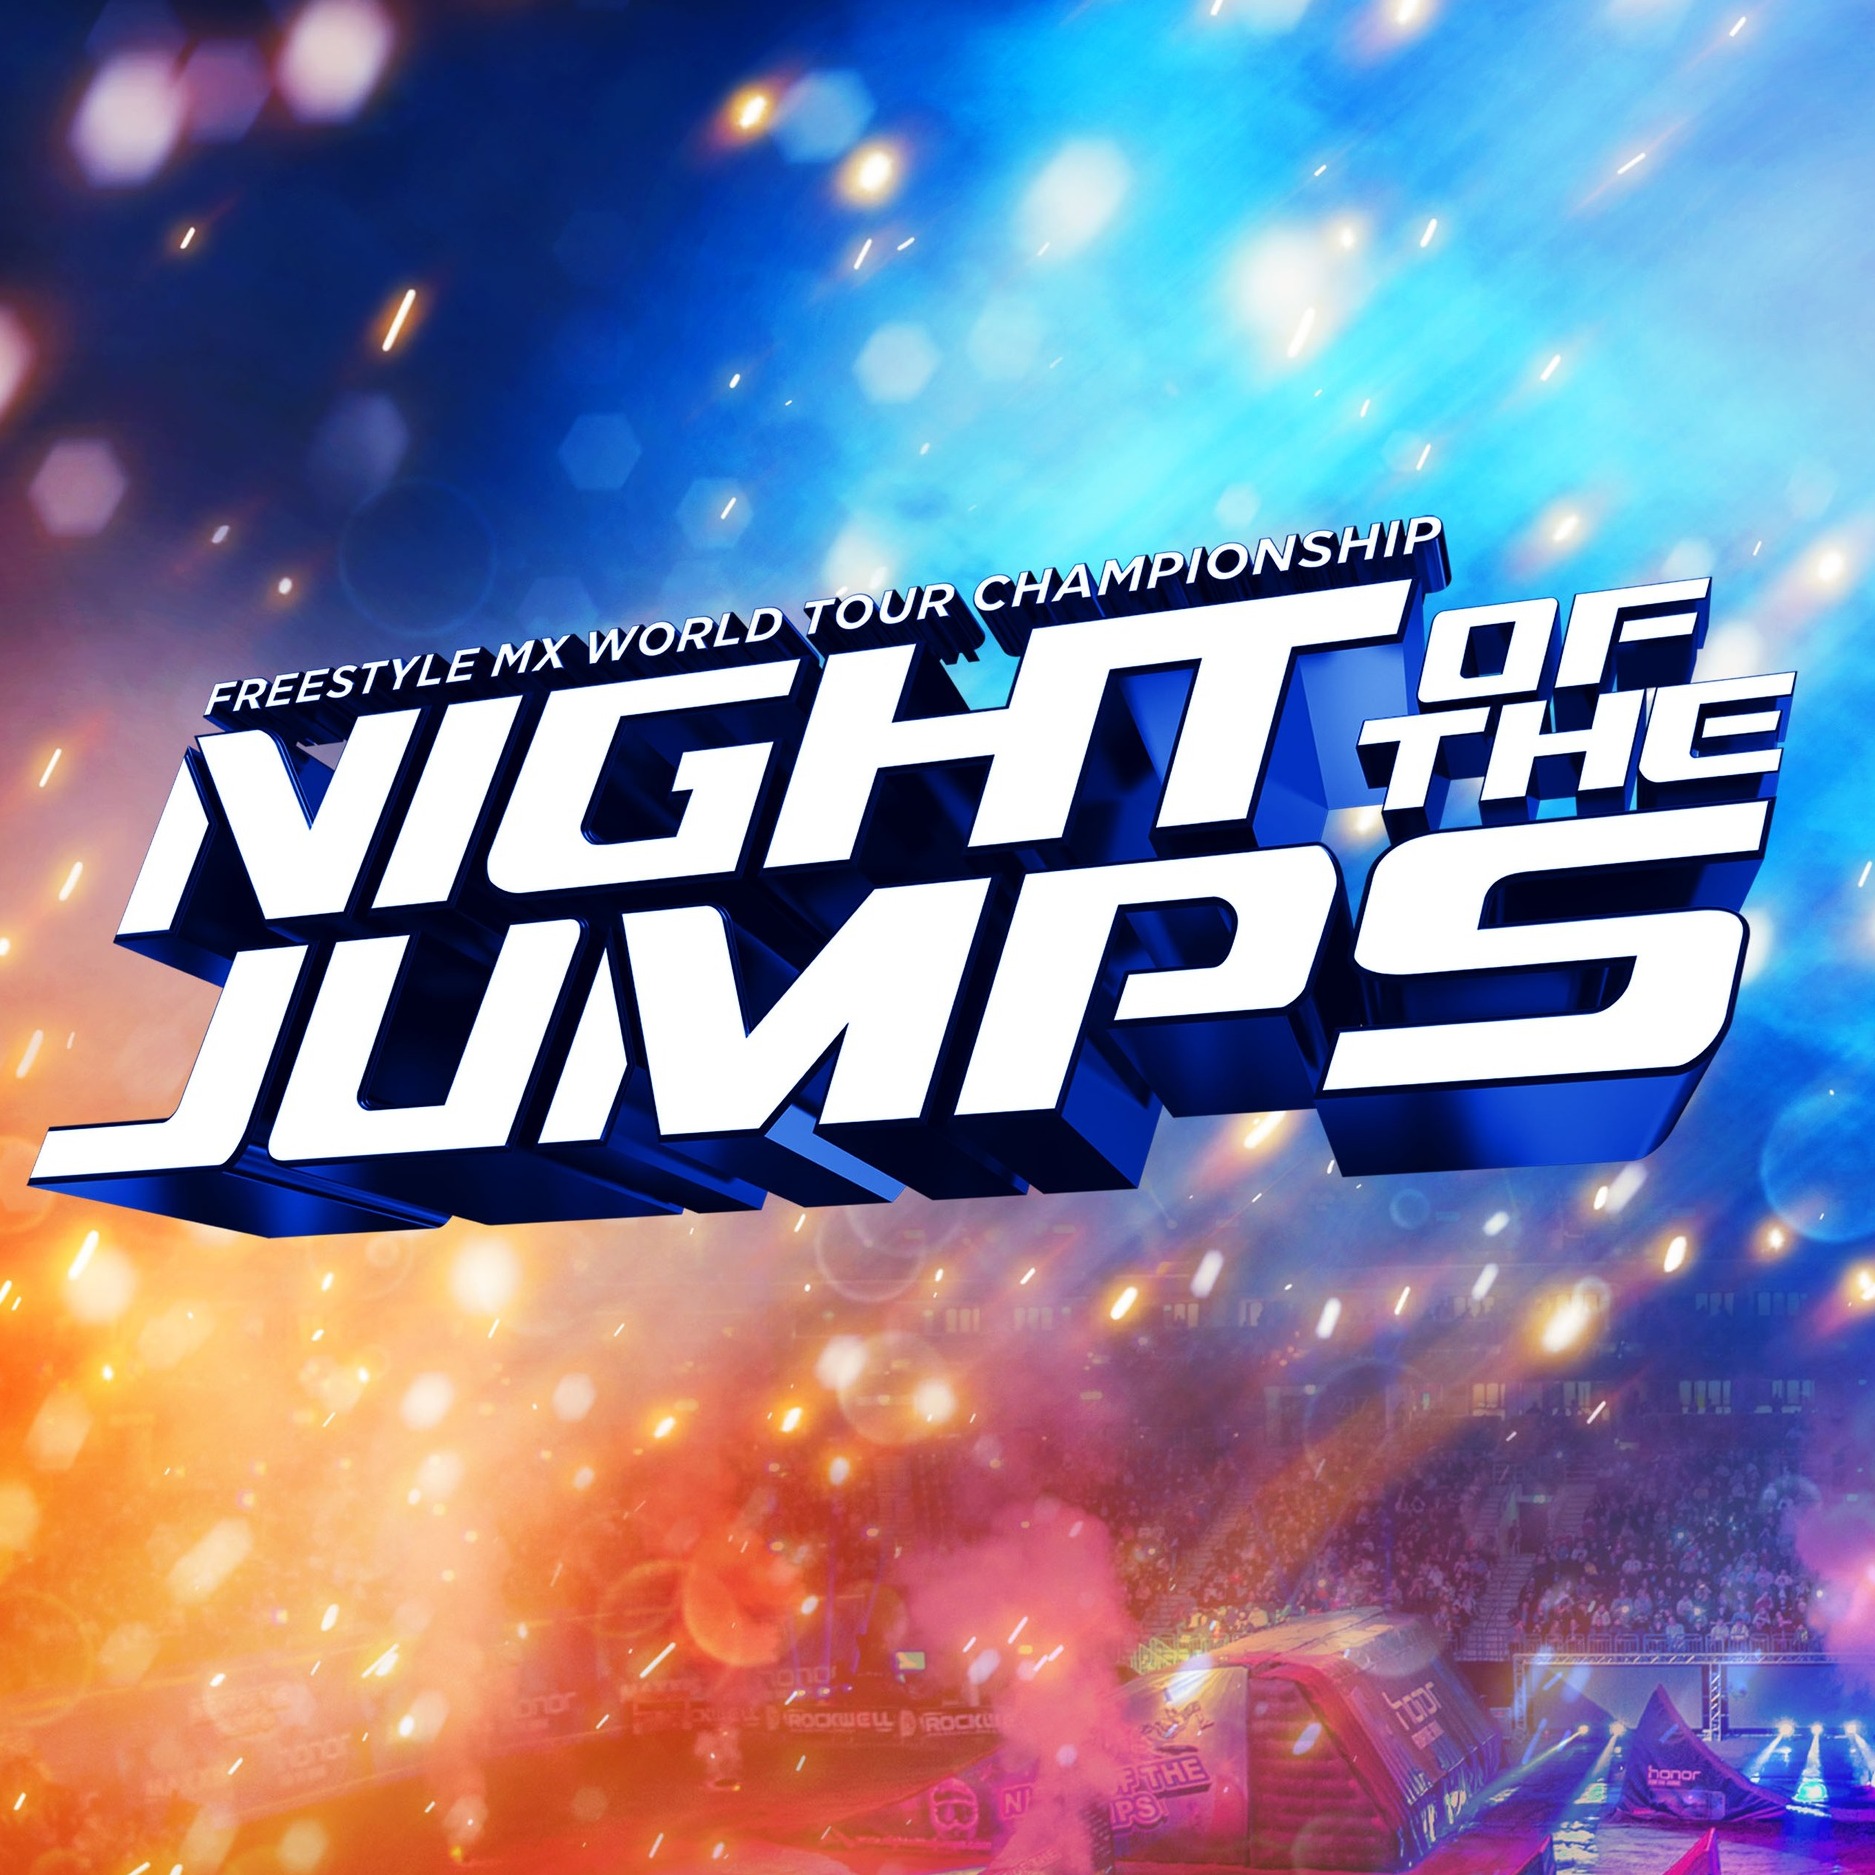 Night of the Jumps al OVB Arena Tickets